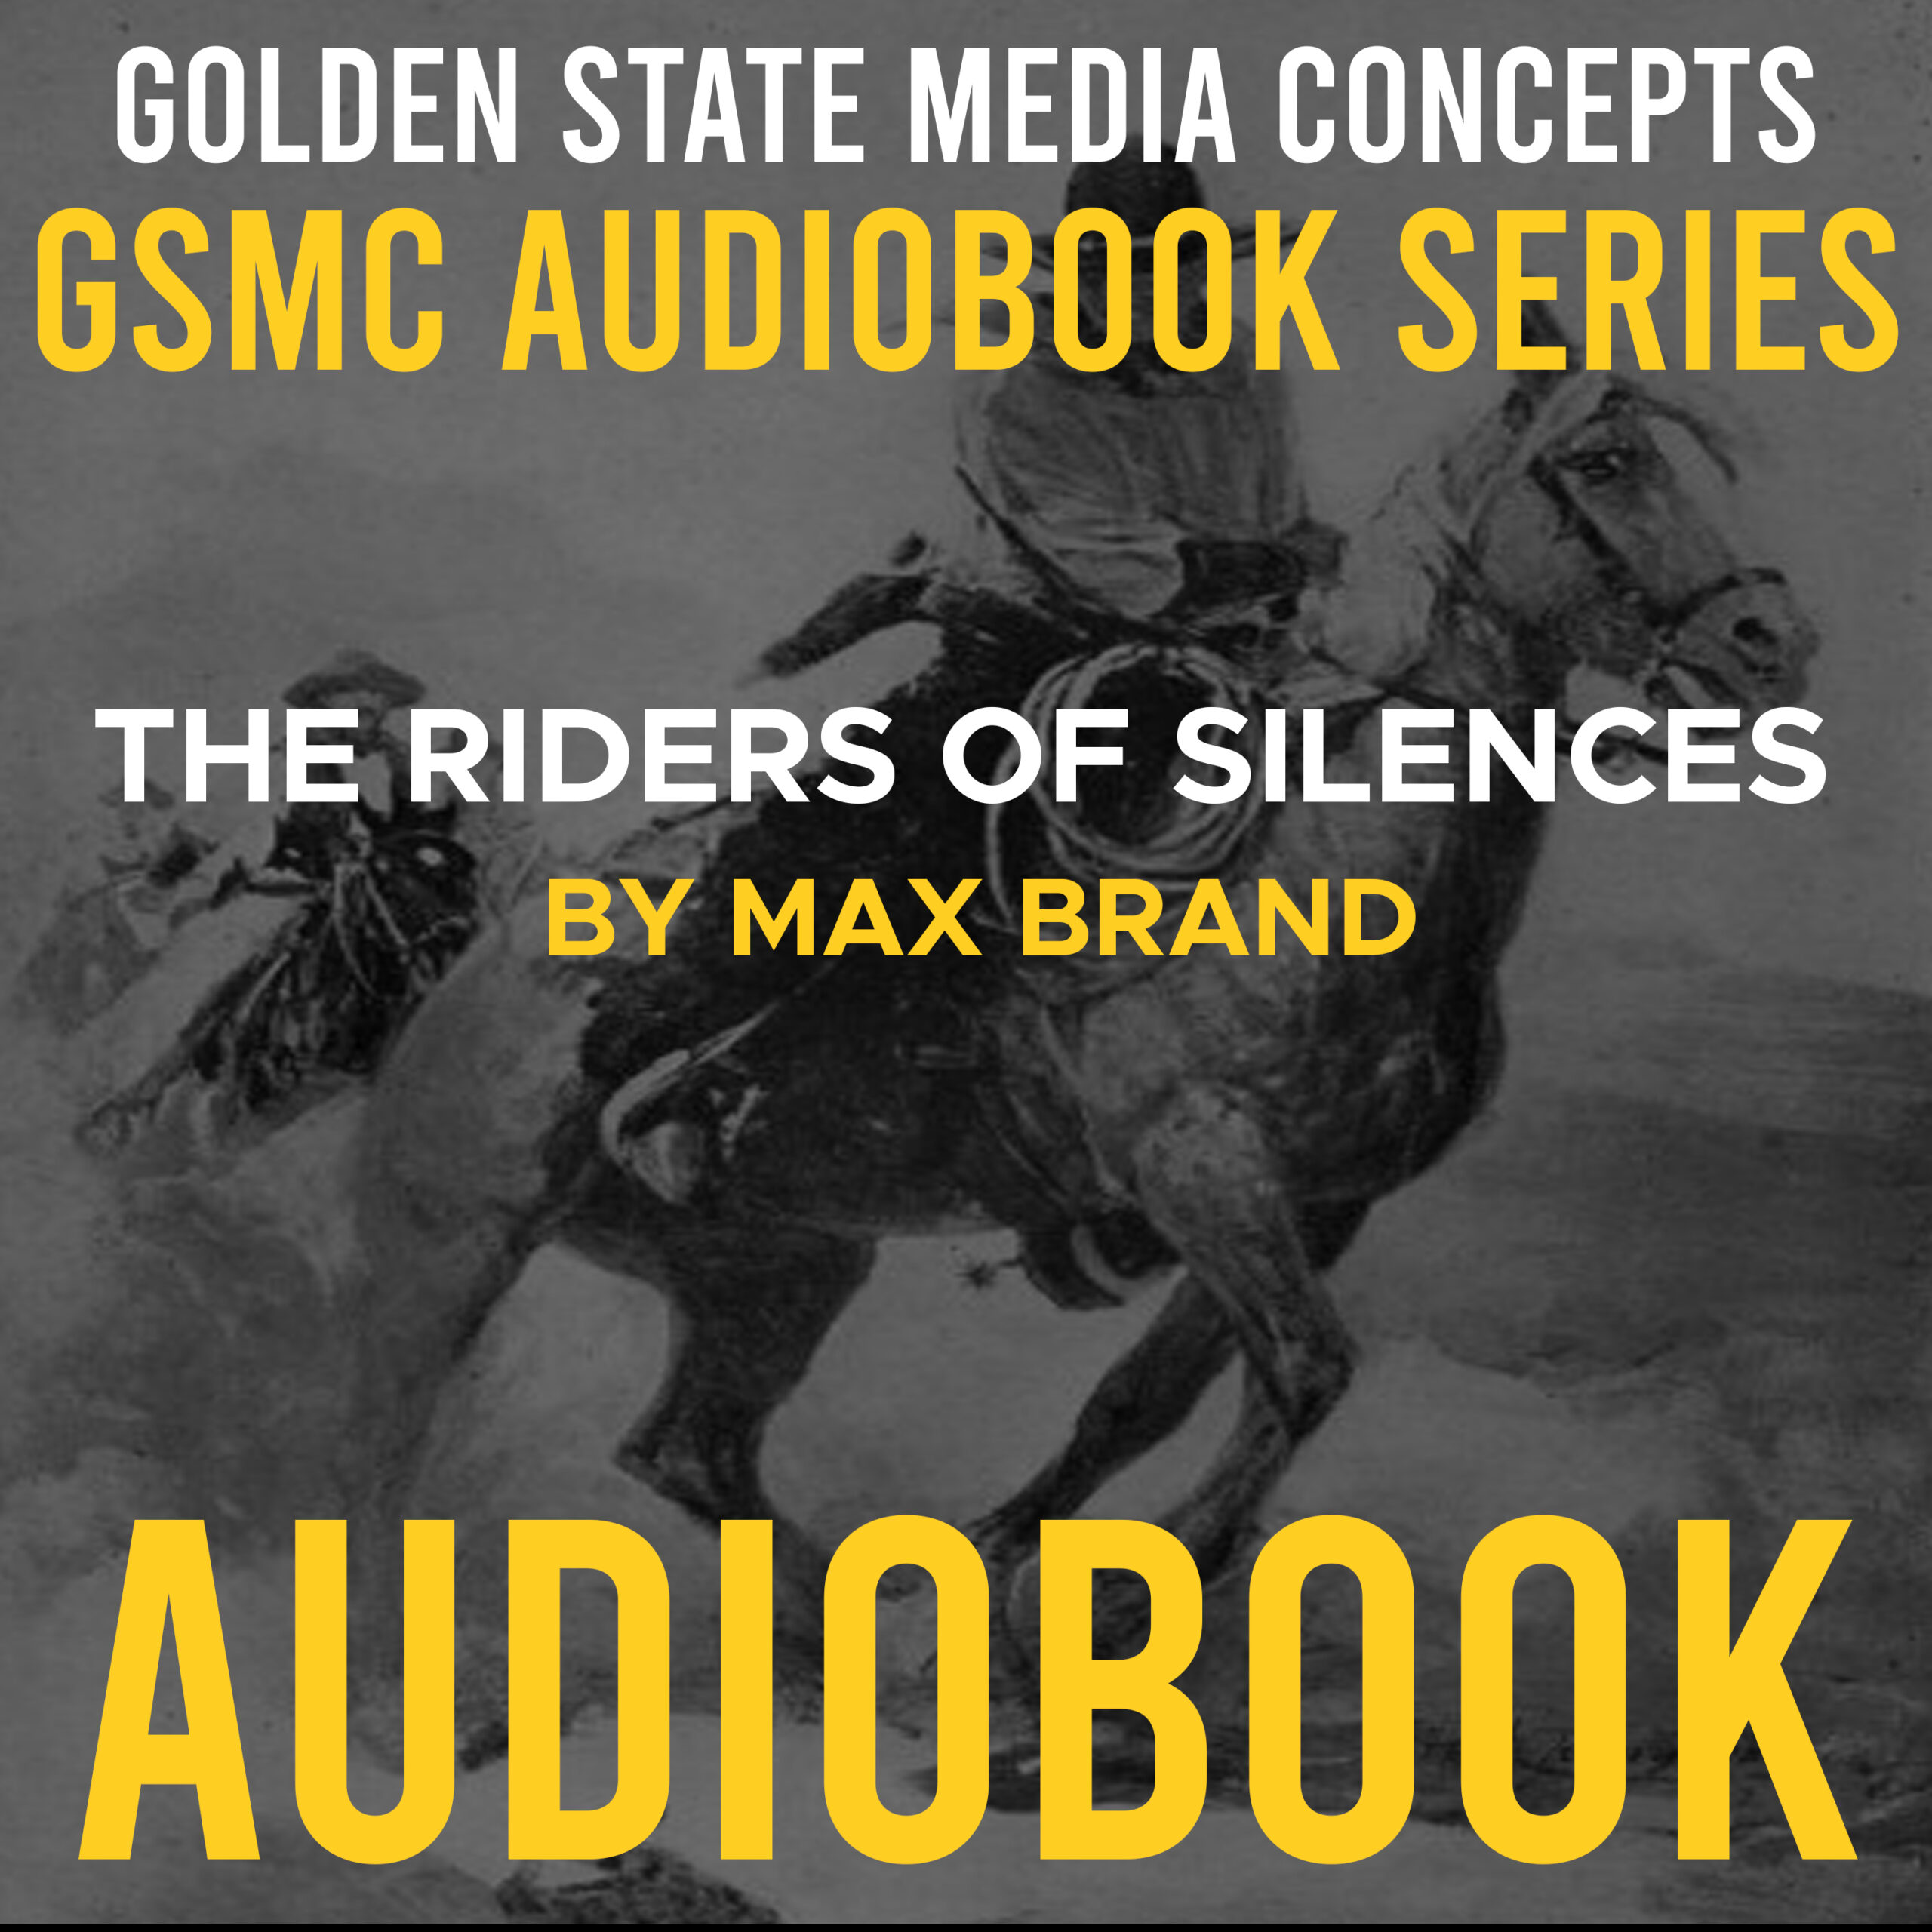 GSMC Audiobook Series: The Riders of Silences by Max Brand